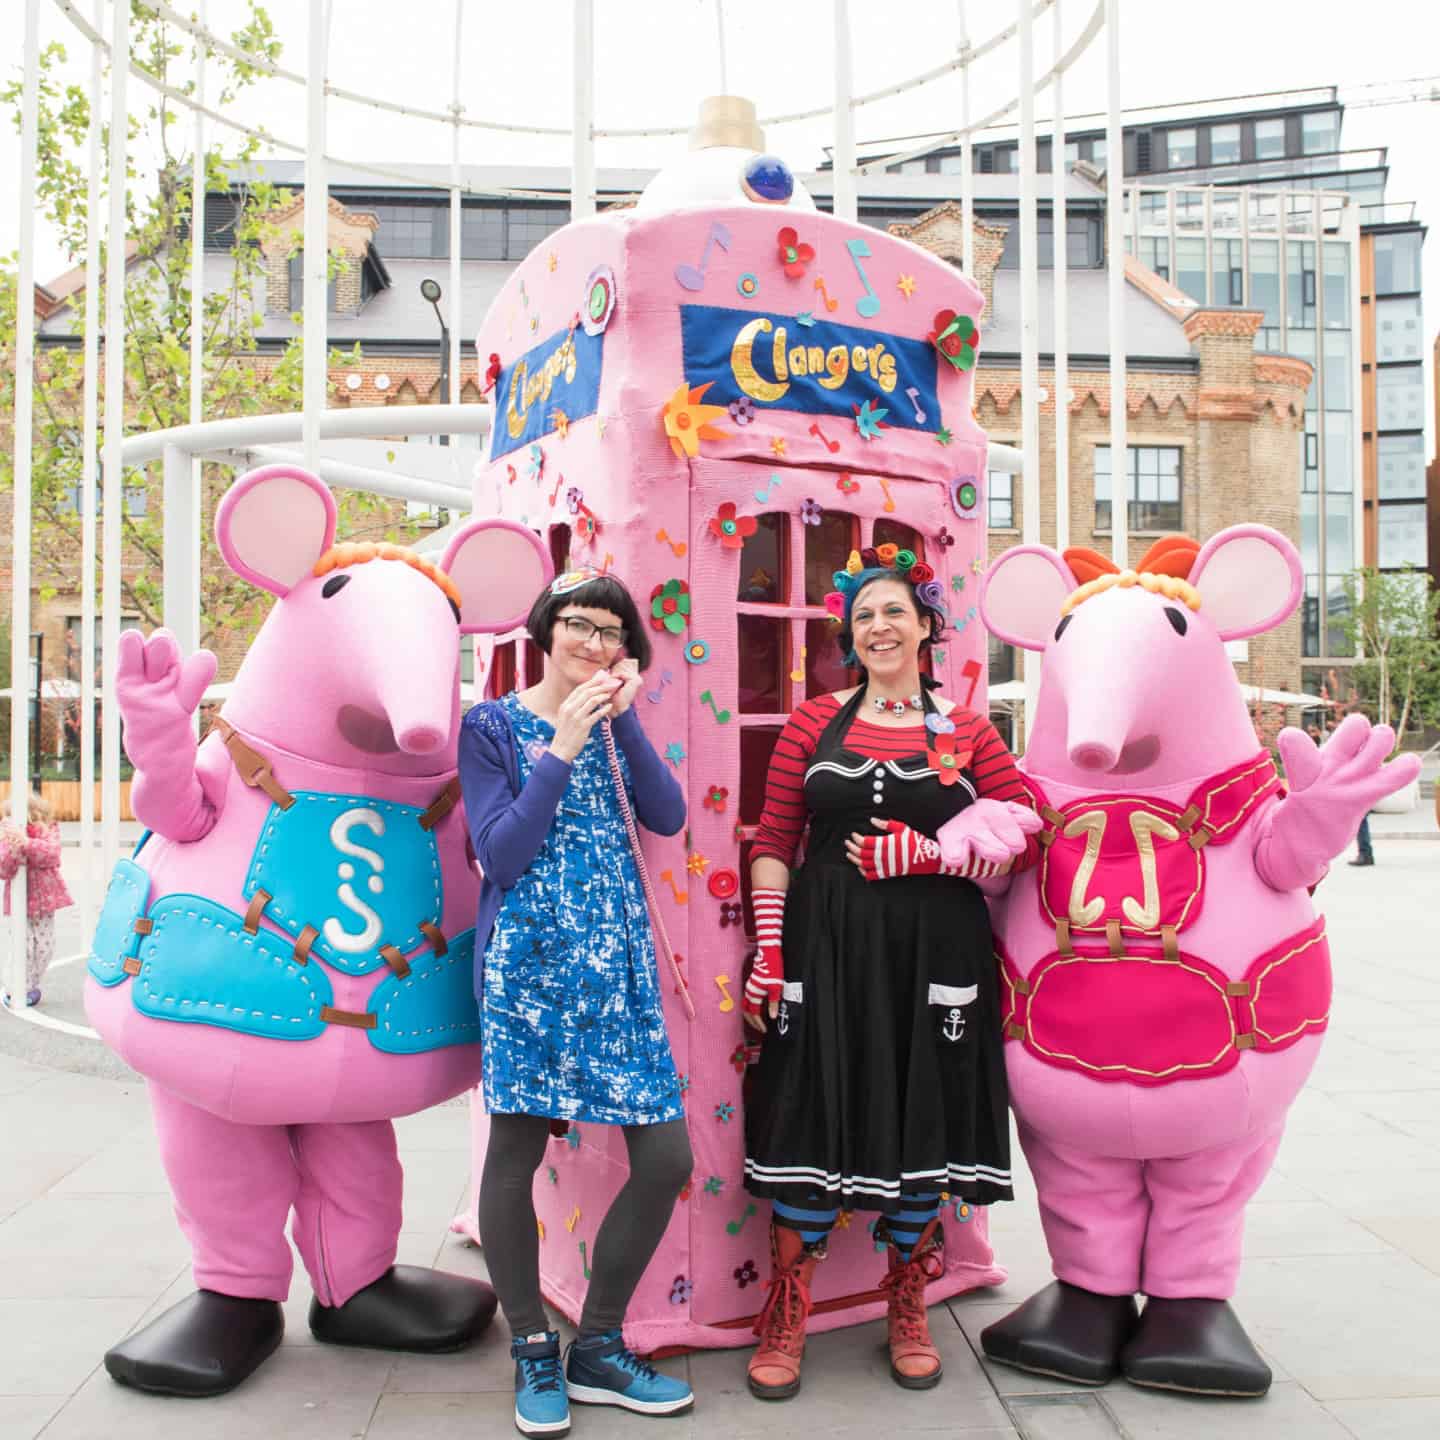 Call the Clangers at King's Cross 8